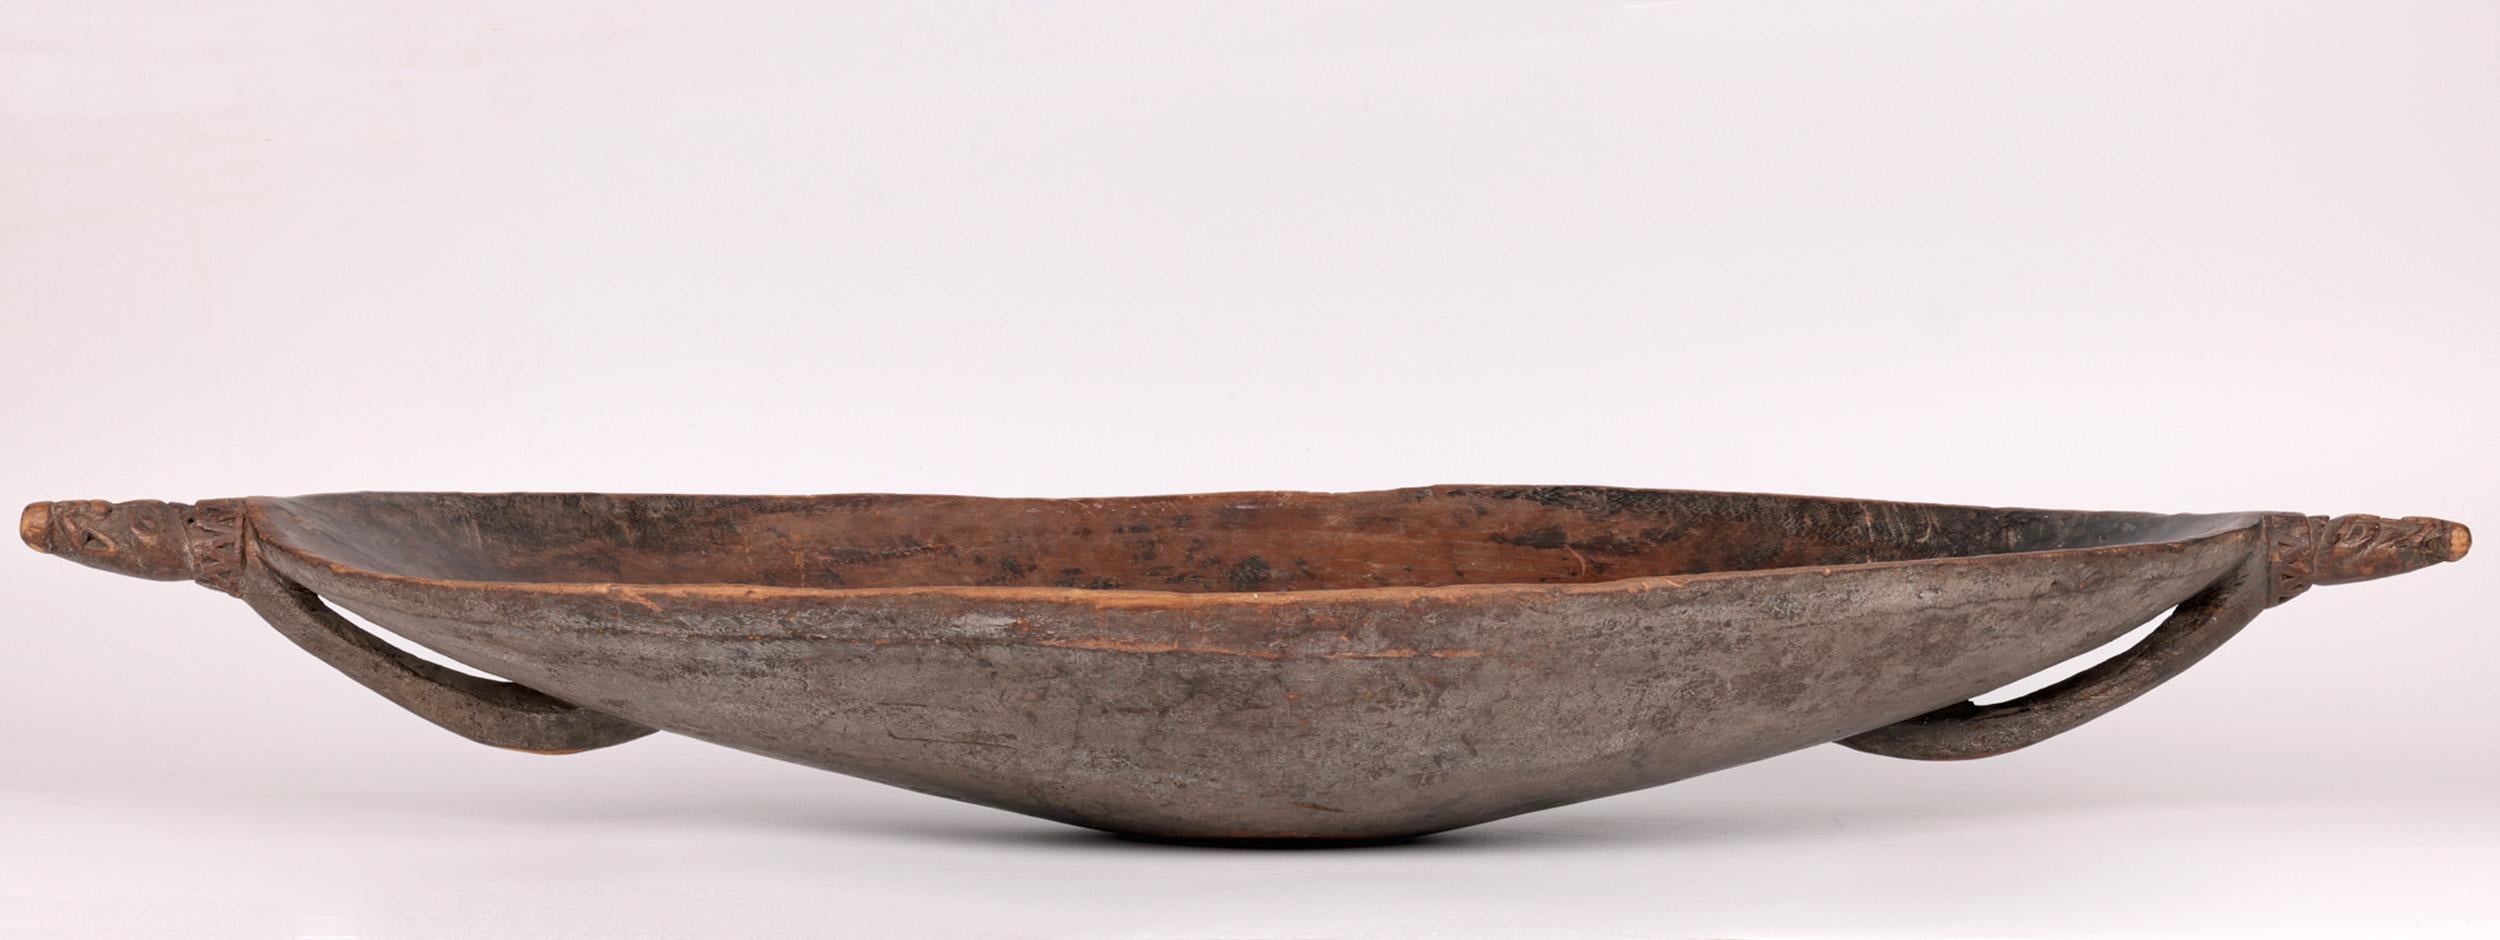 Papau New Guinea Carved Wood Feast Bowl In Good Condition For Sale In Bishop's Stortford, Hertfordshire